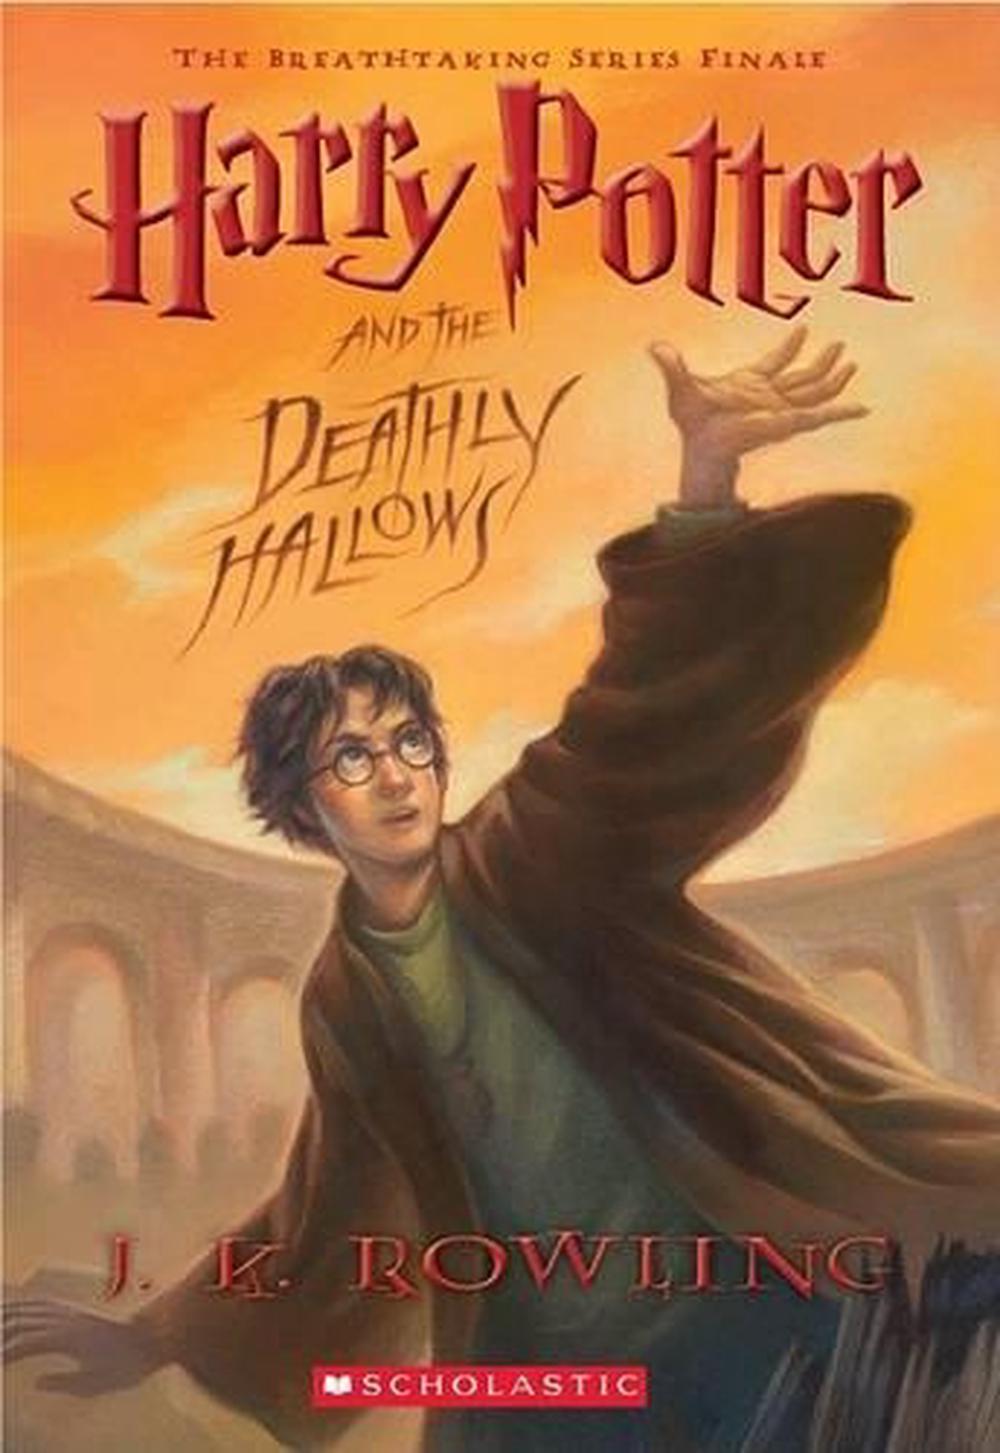 download free harry potter and the deathly hallows part 2 review